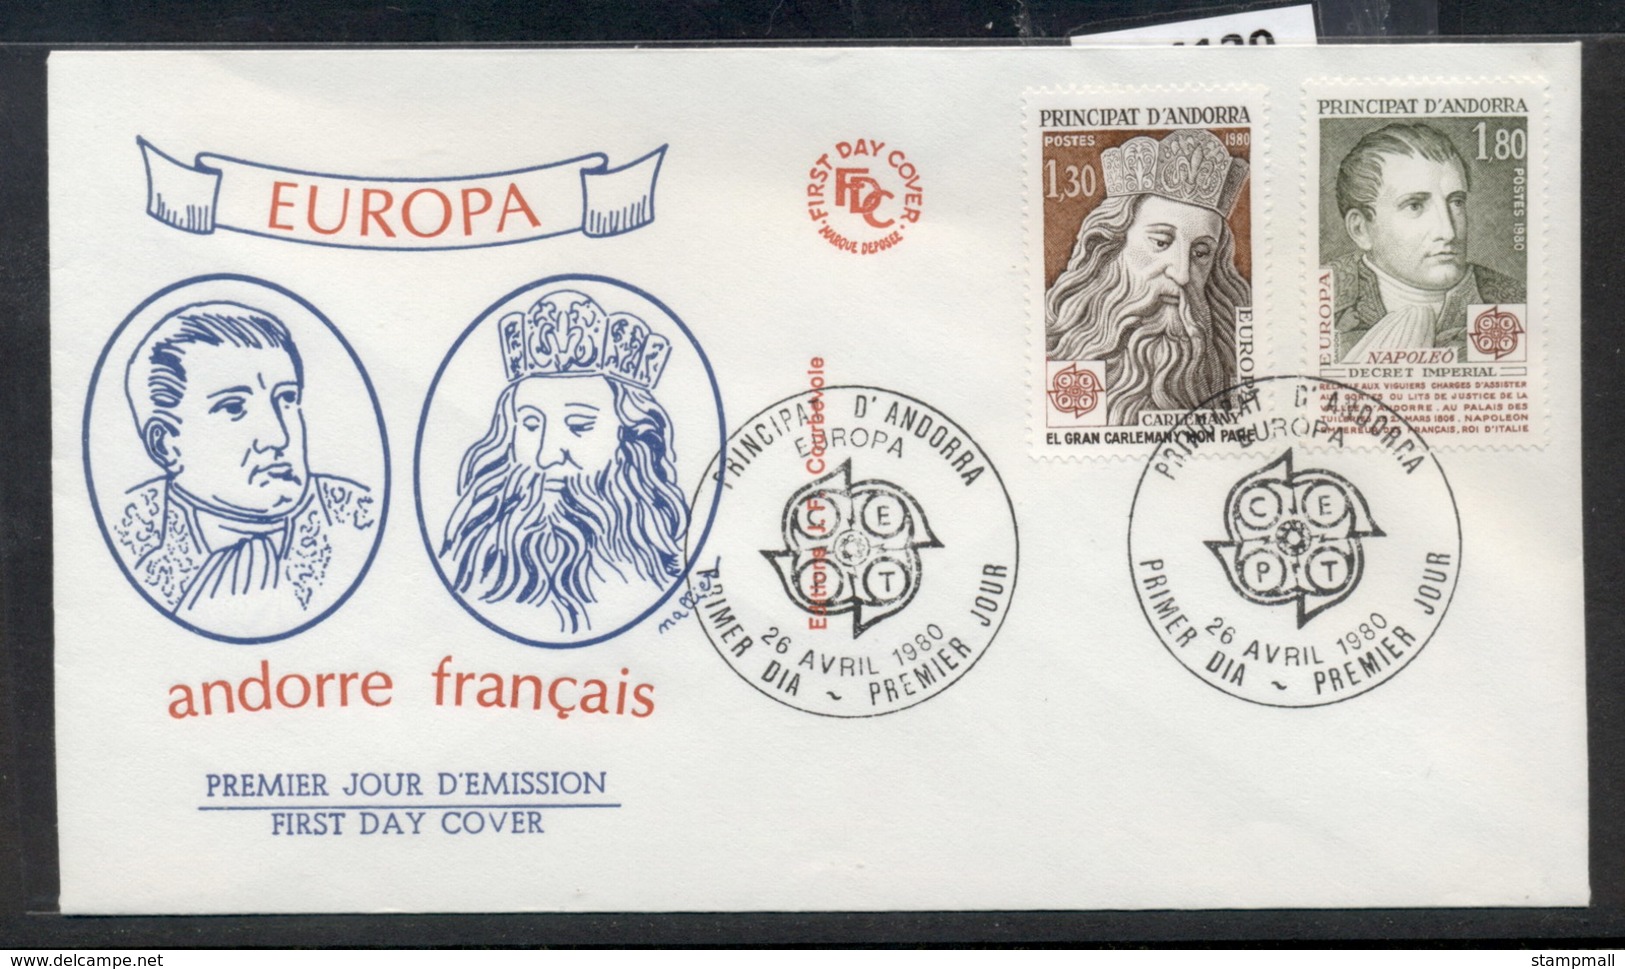 Andorra (Fr.) 1980 Europa Celebrities FDC - Covers & Documents